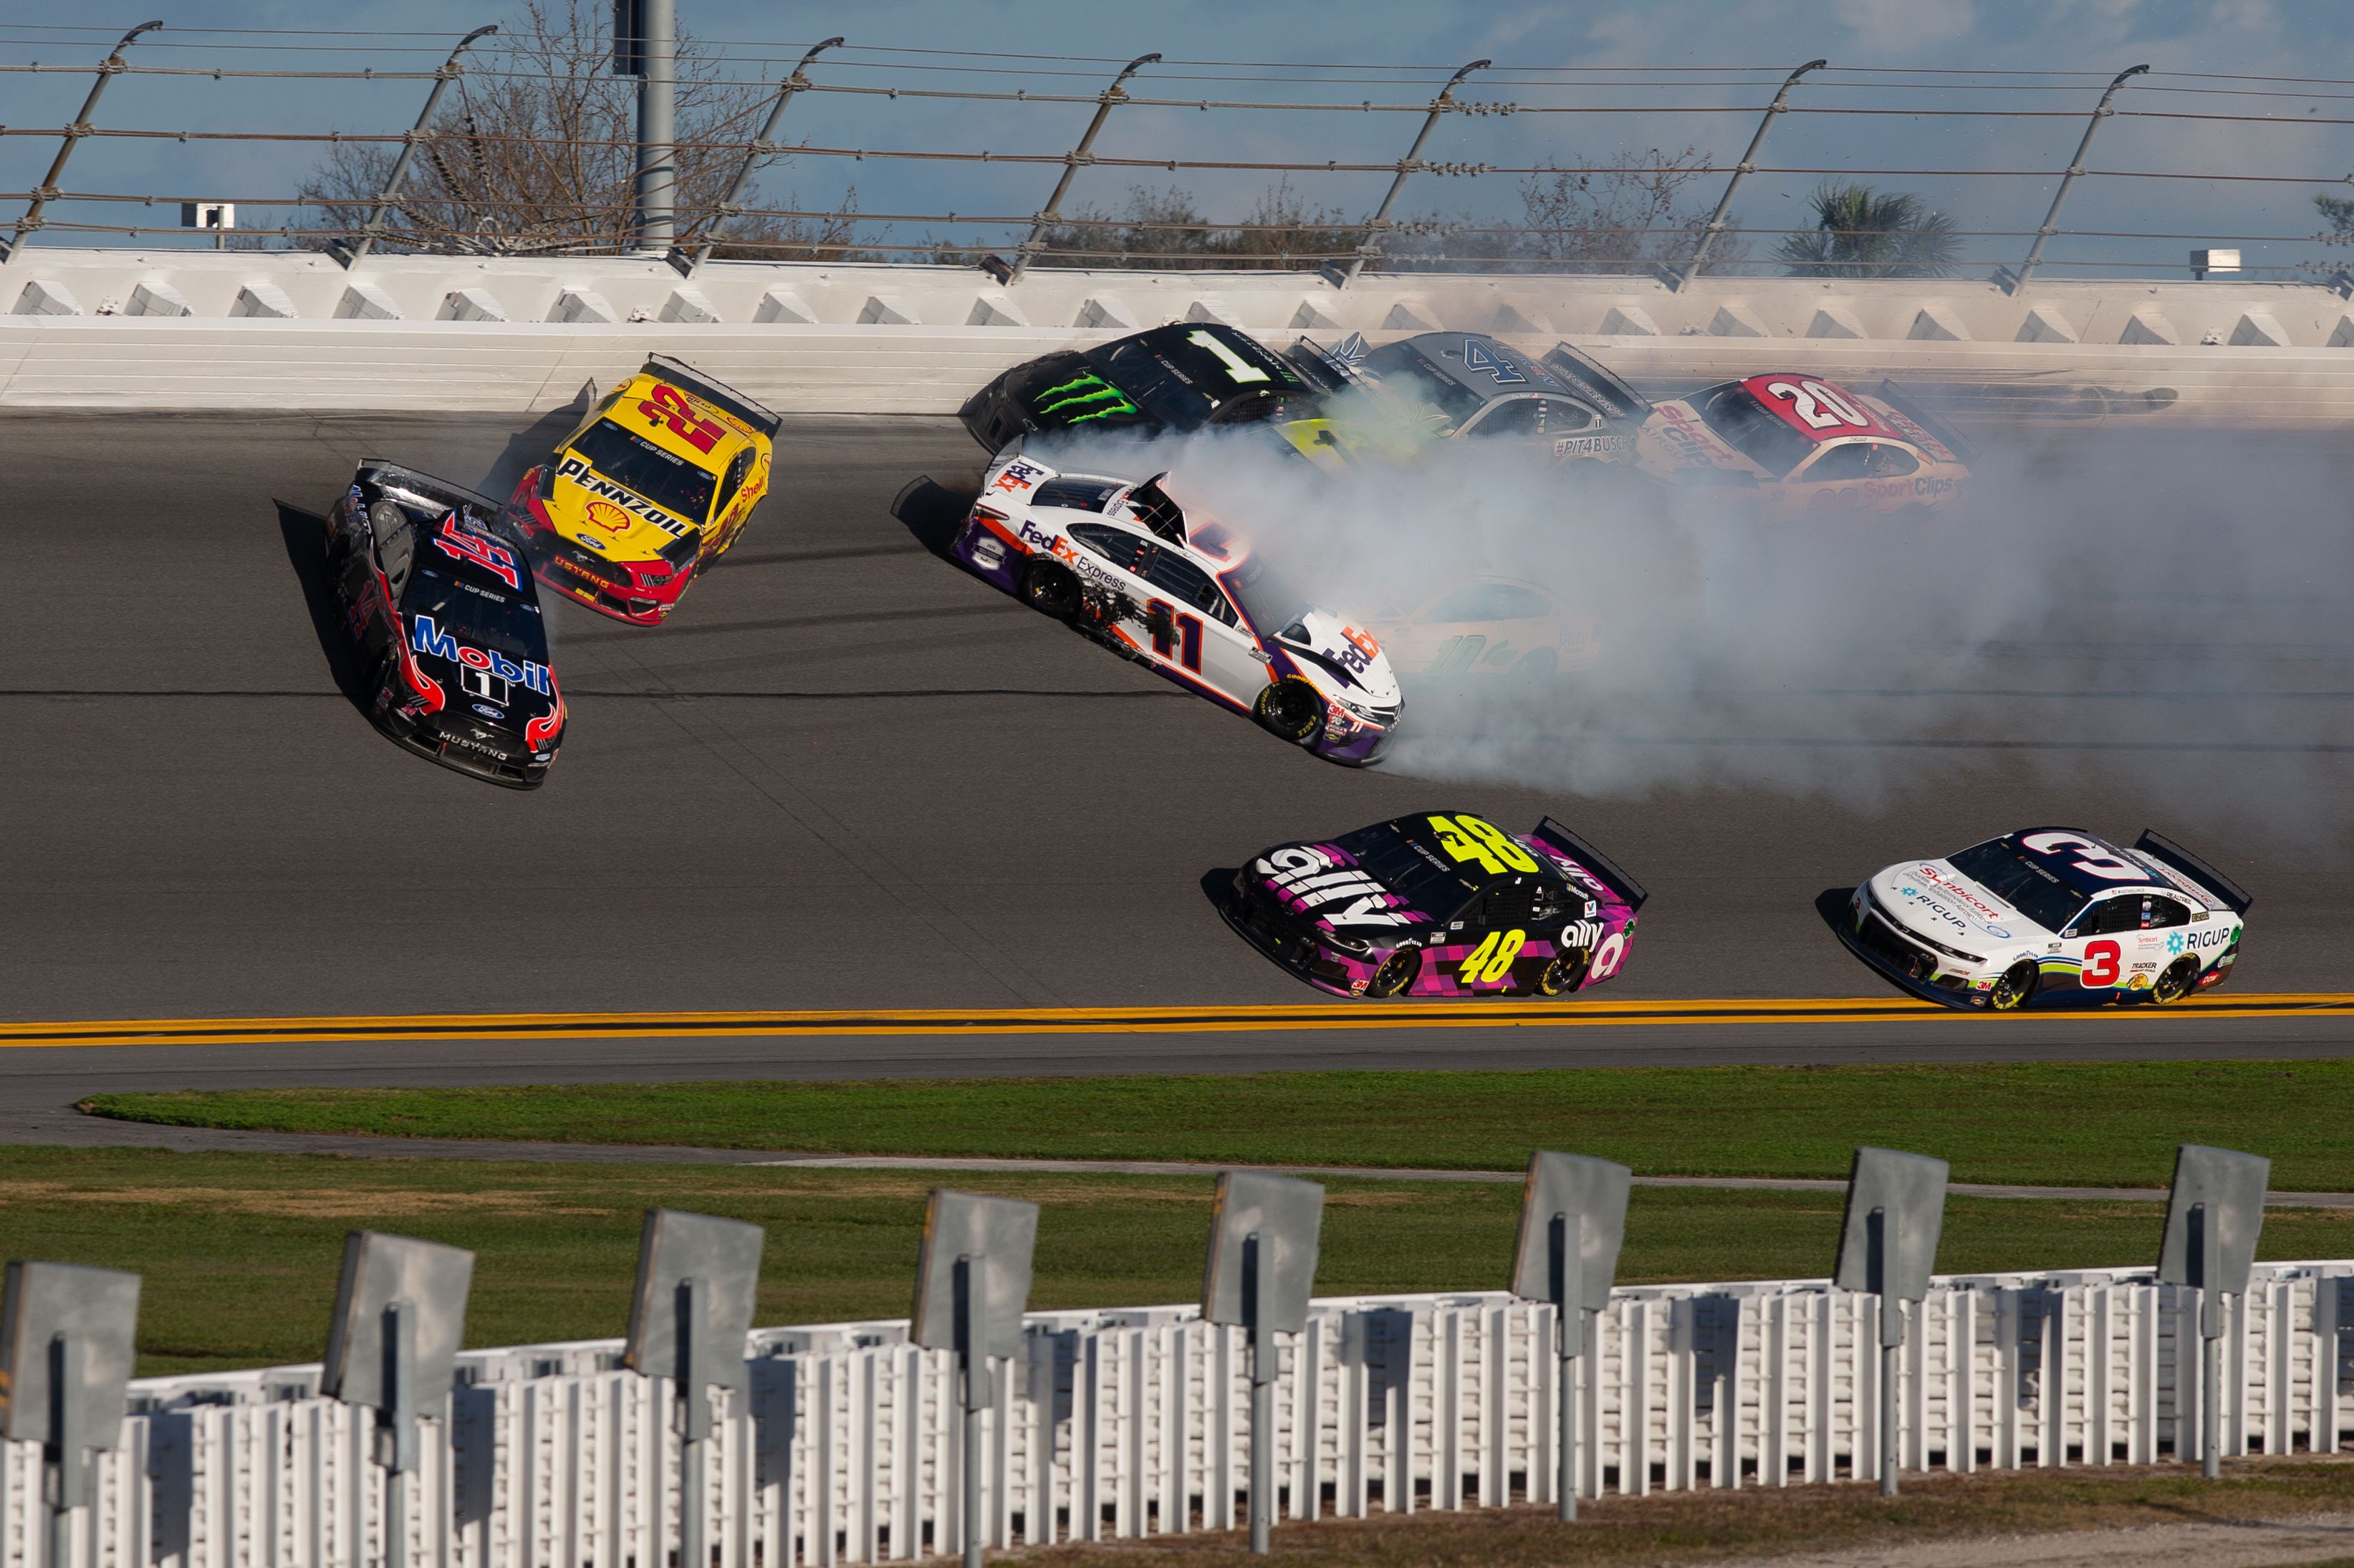 Where to Find the Daytona 500, NASCAR TV Schedule for Race Weekend at Daytona